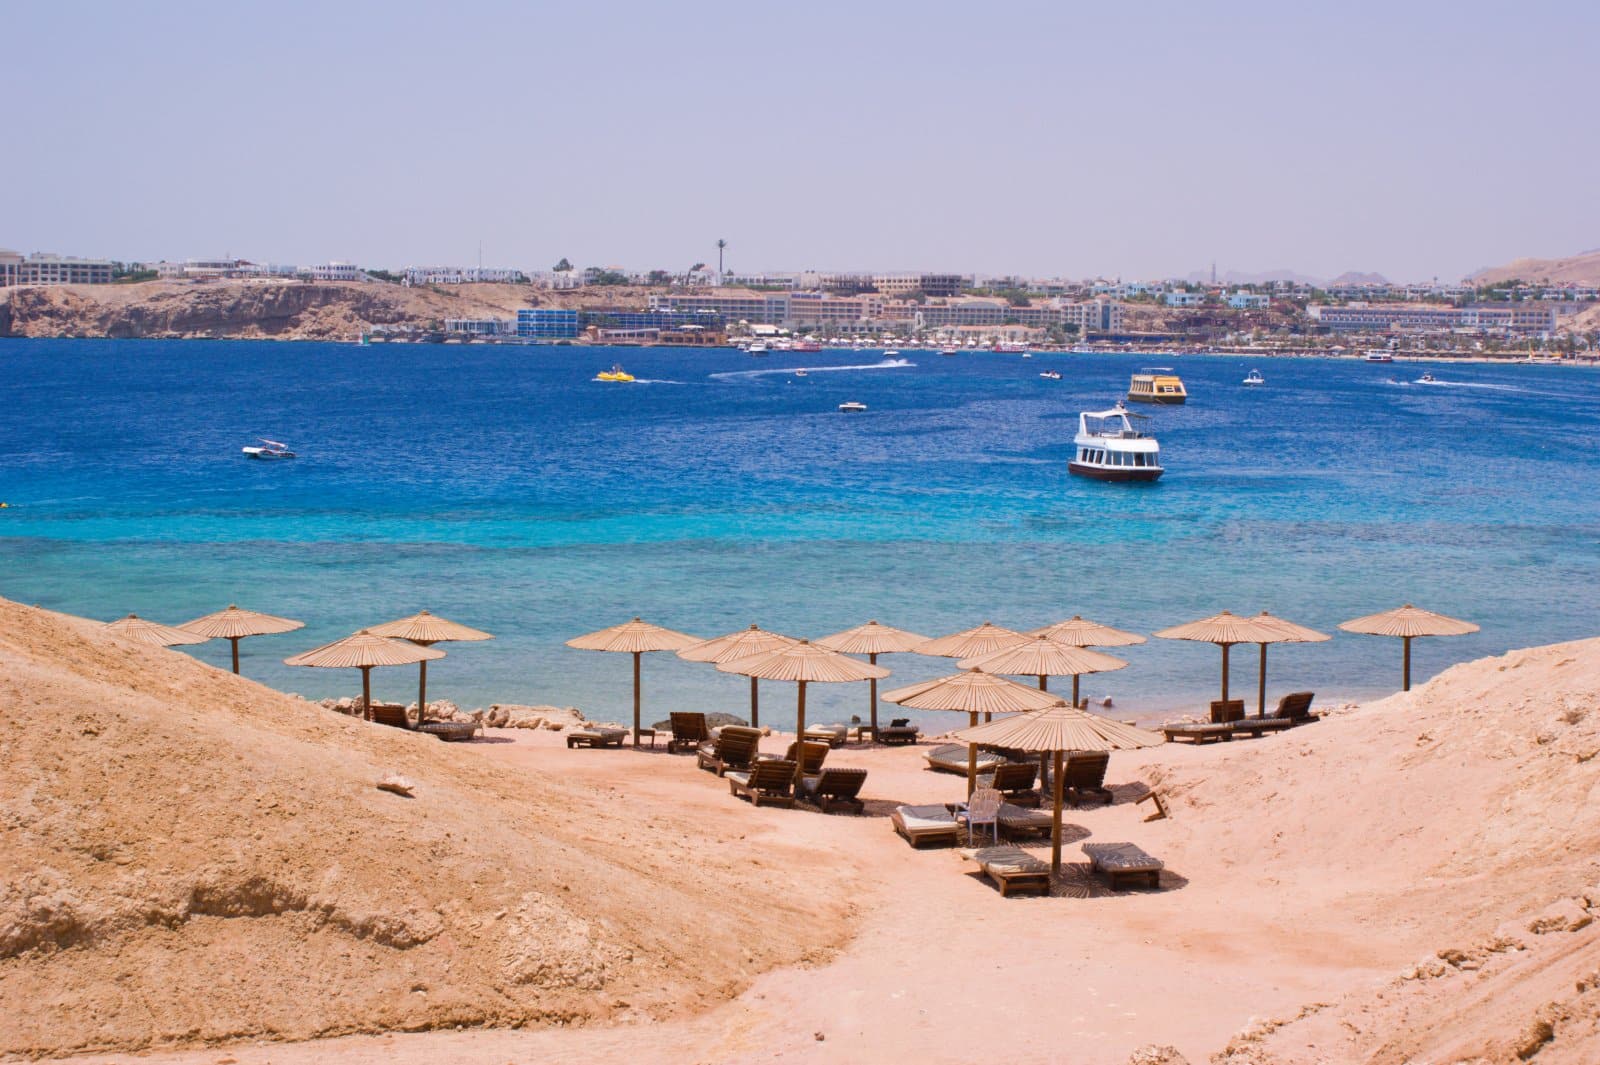 <p class="wp-caption-text">Image Credit: Shutterstock / Pavel Skopets</p>  <p><span>Egypt’s Red Sea Riviera, stretching from Suez to the Sudanese border, is famed for its crystal-clear waters, vibrant coral reefs, and luxury resorts. Destinations like Marsa Alam and El Gouna offer world-class diving, snorkeling, and relaxation opportunities.</span></p>